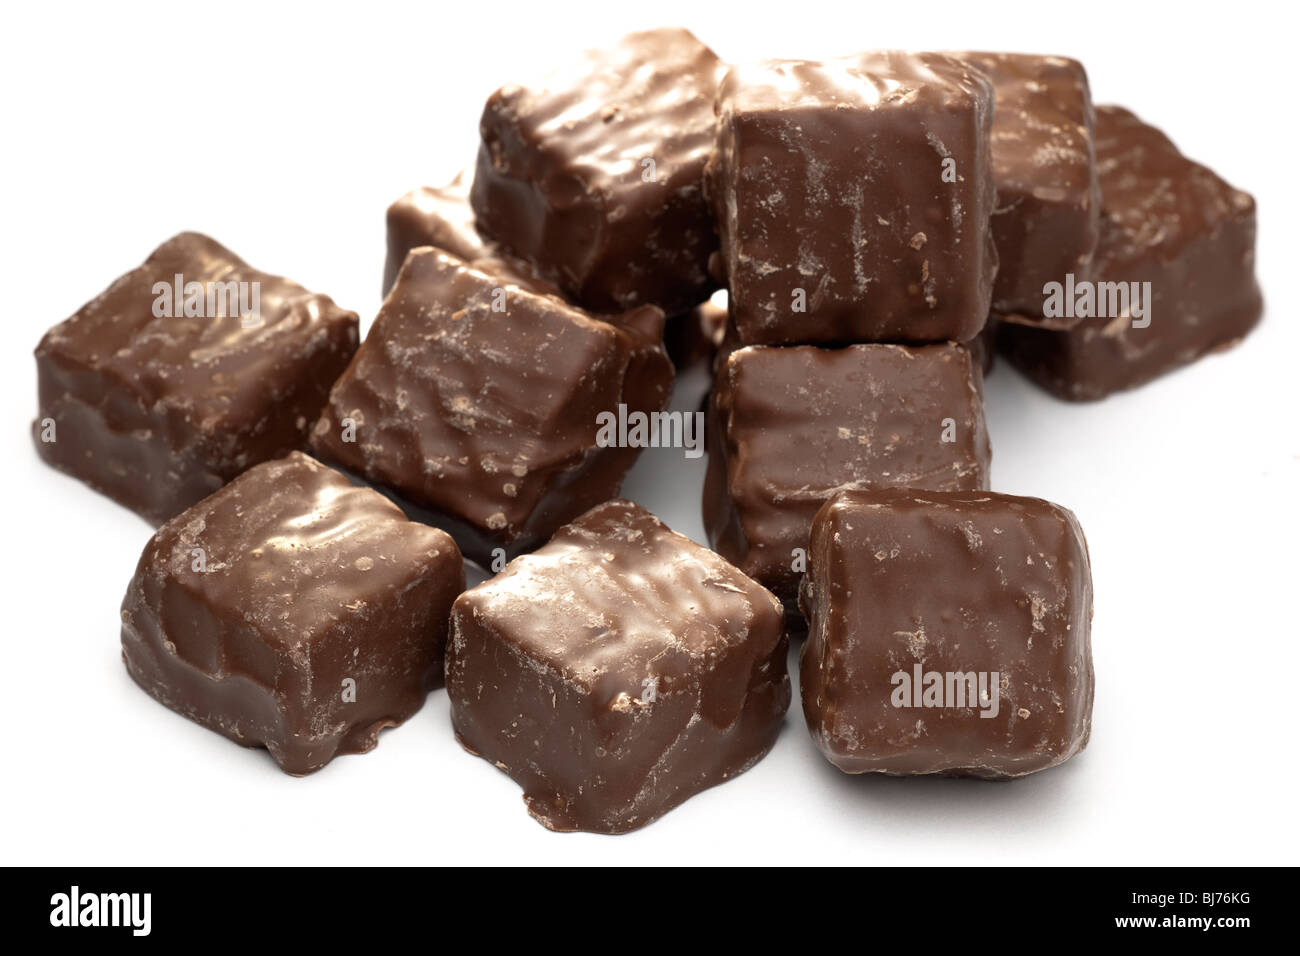 Pile of chocolate covered square biscuits Stock Photo